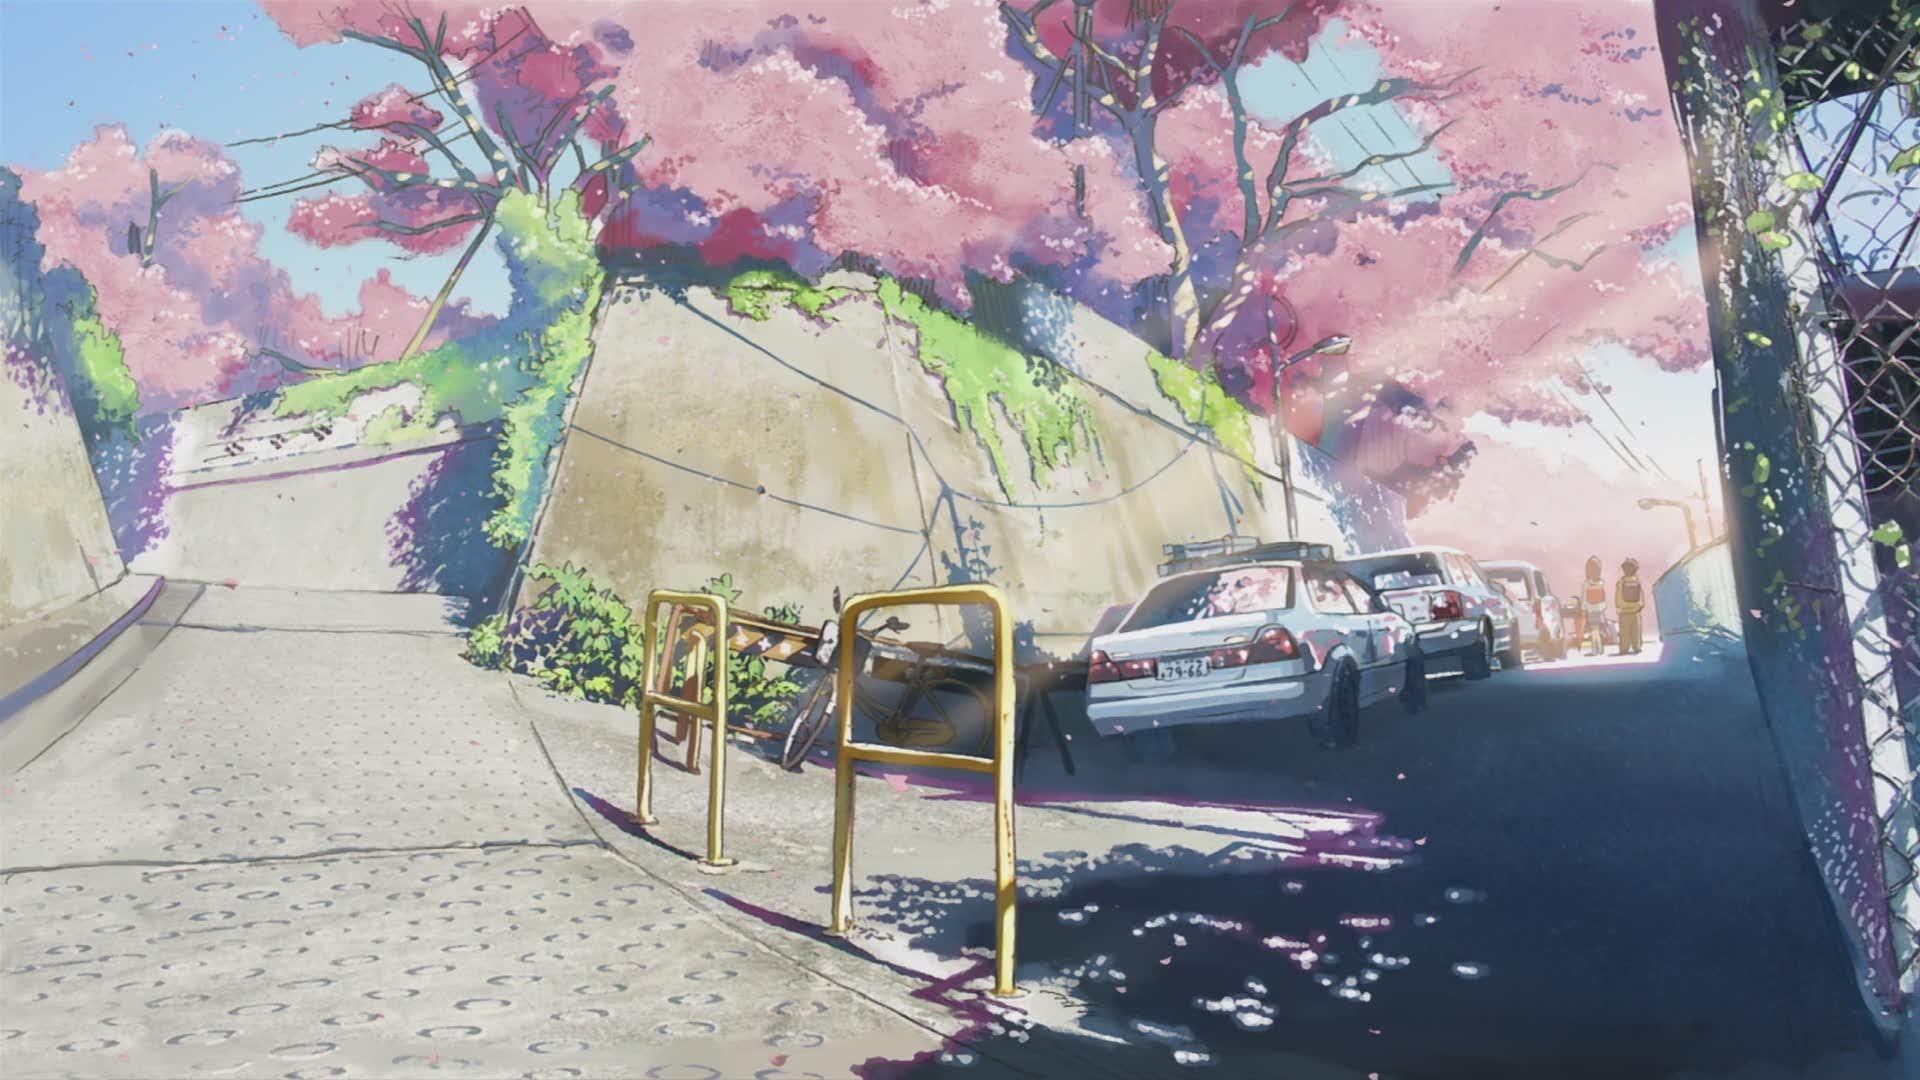 Anime Cherry Blossom Full HD Background Per Second